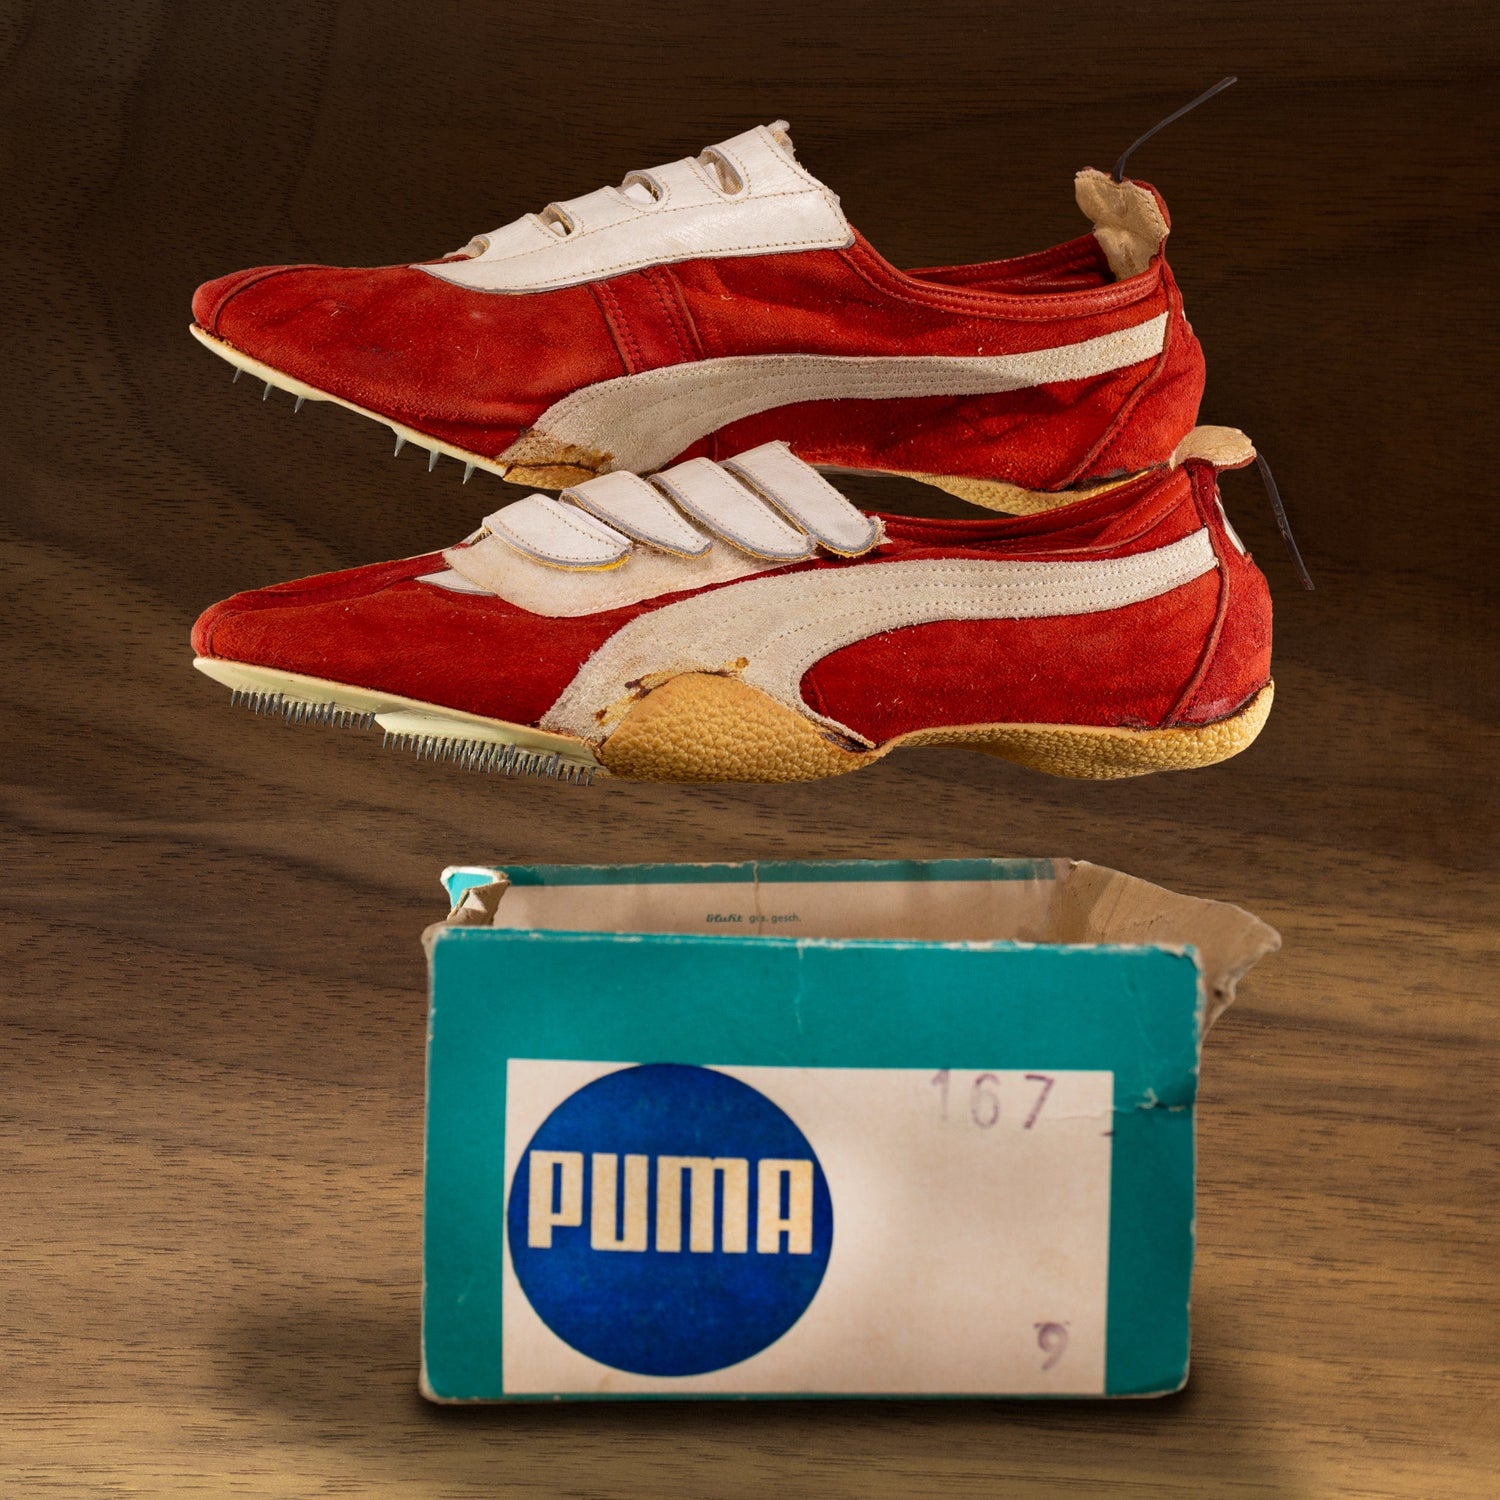 Arena Abuelo A menudo hablado 1968 Puma Olympic Track Shoe Set with banned "Brush" Shoes – Gold & Silver  Pawn Shop